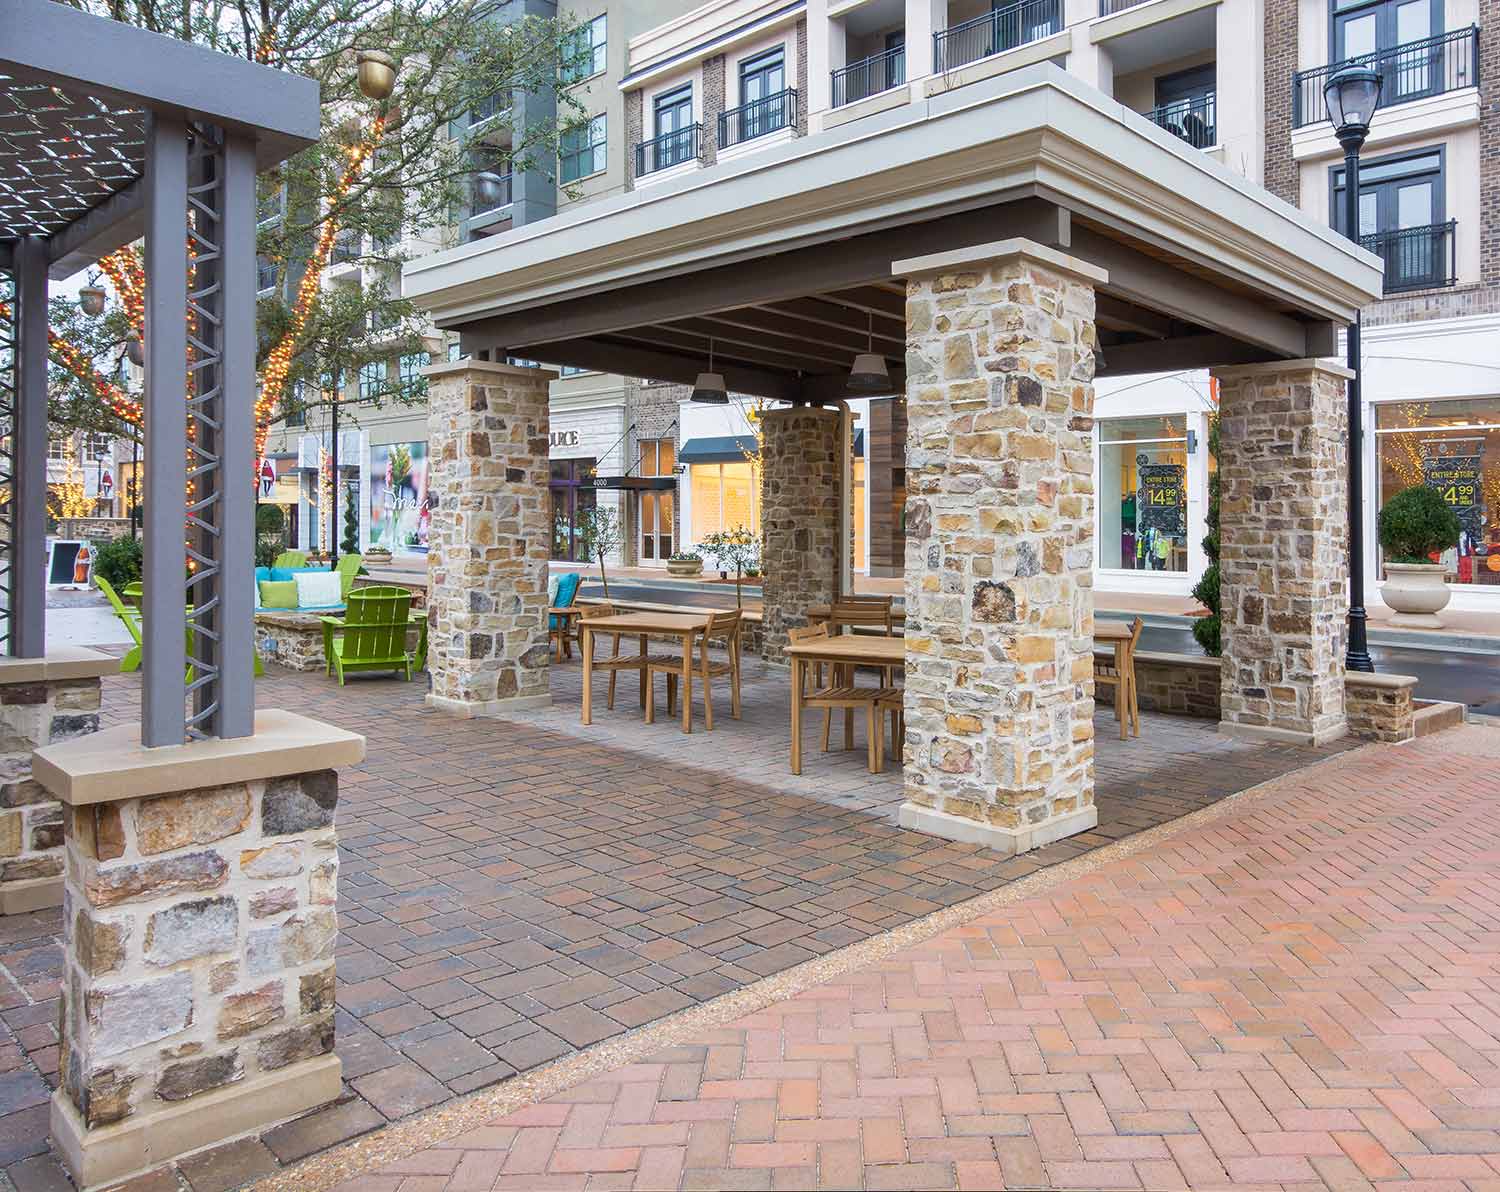 Custom brick pathway with stone pillars for a covered seating area